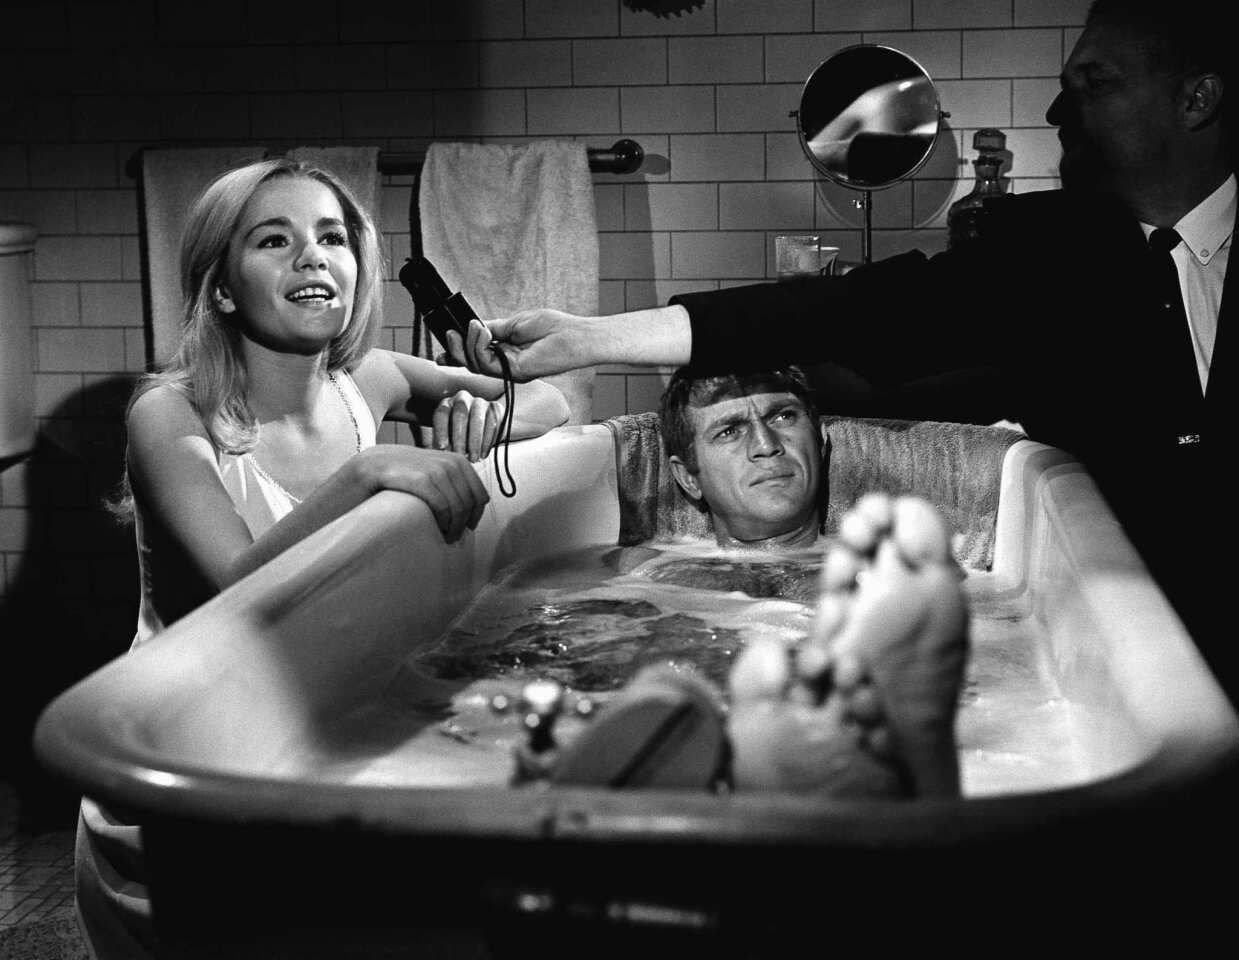 Tuesday Weld and Steve McQueen